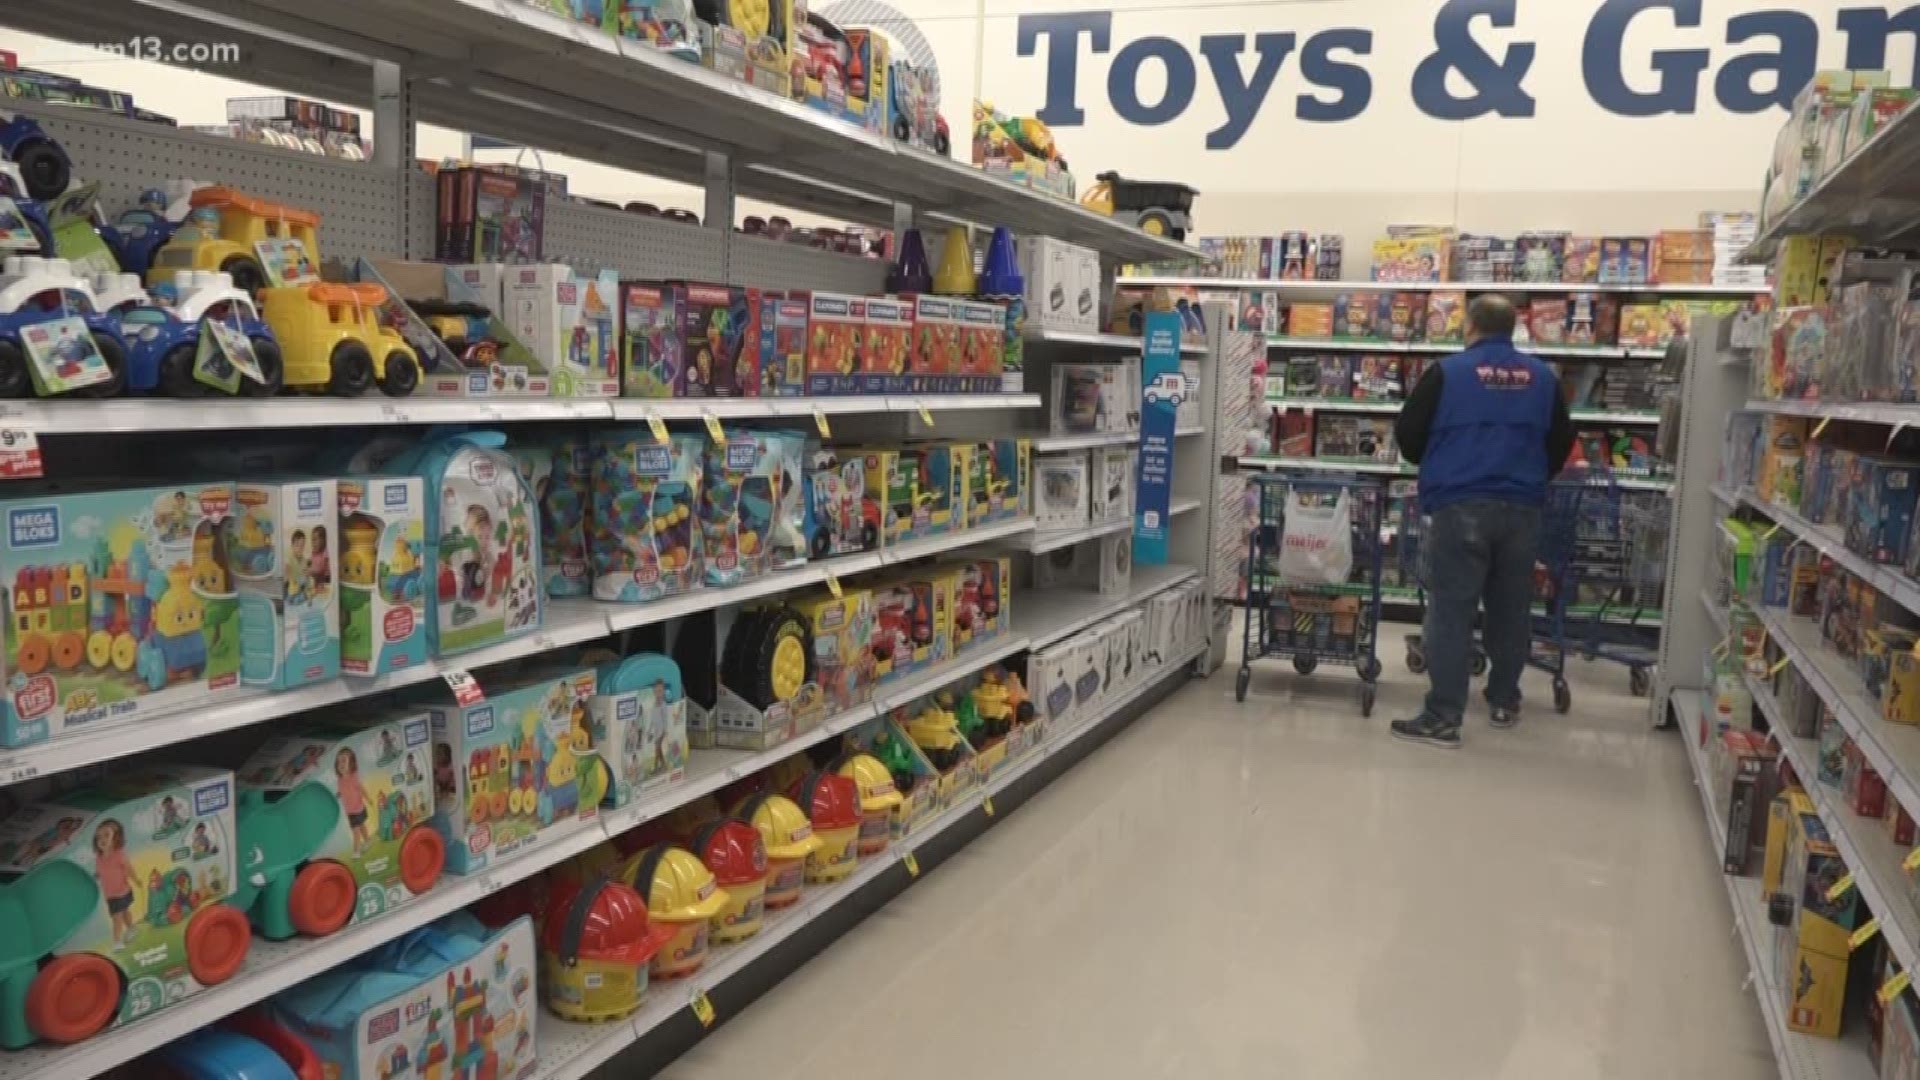 Toys for Tots shopping spree held at Meijer